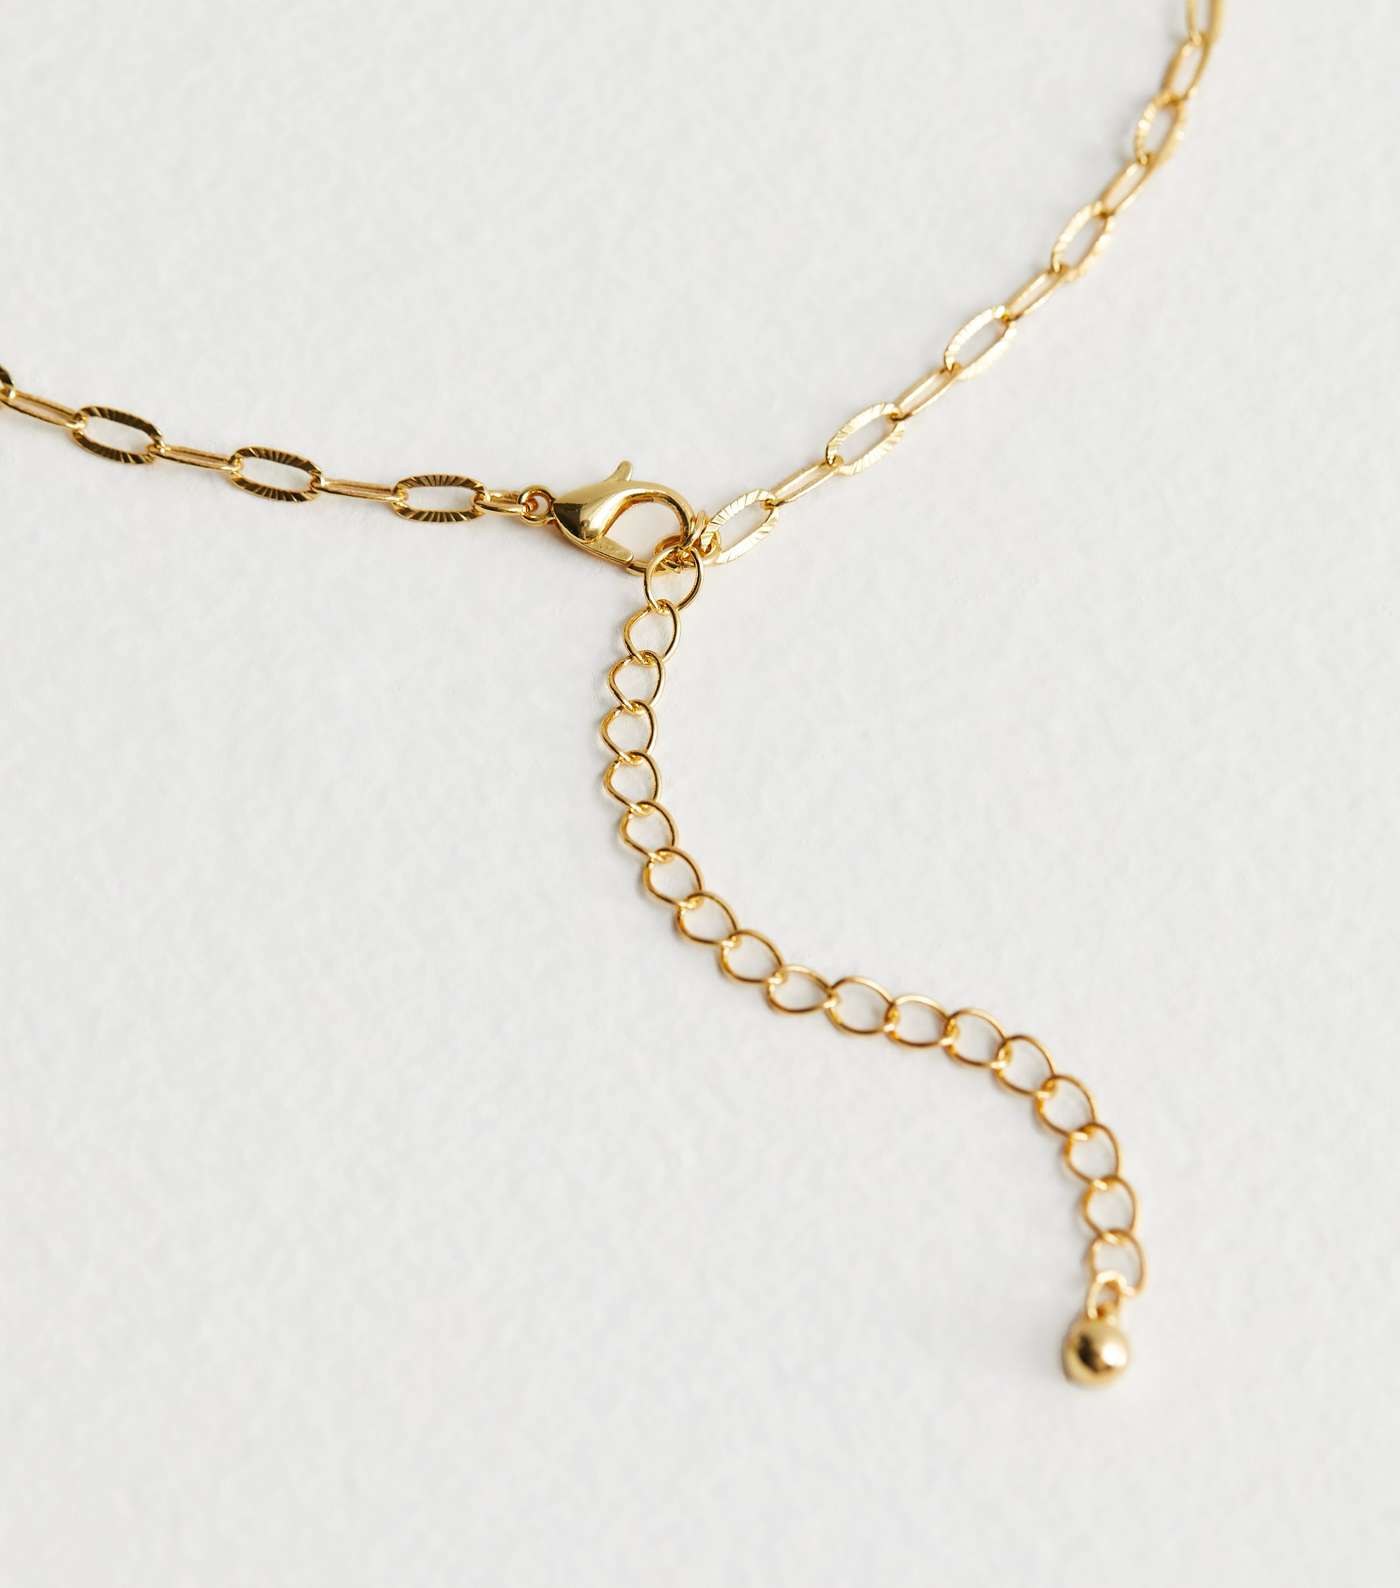 Real Gold Plate Textured Chain Necklace Image 5